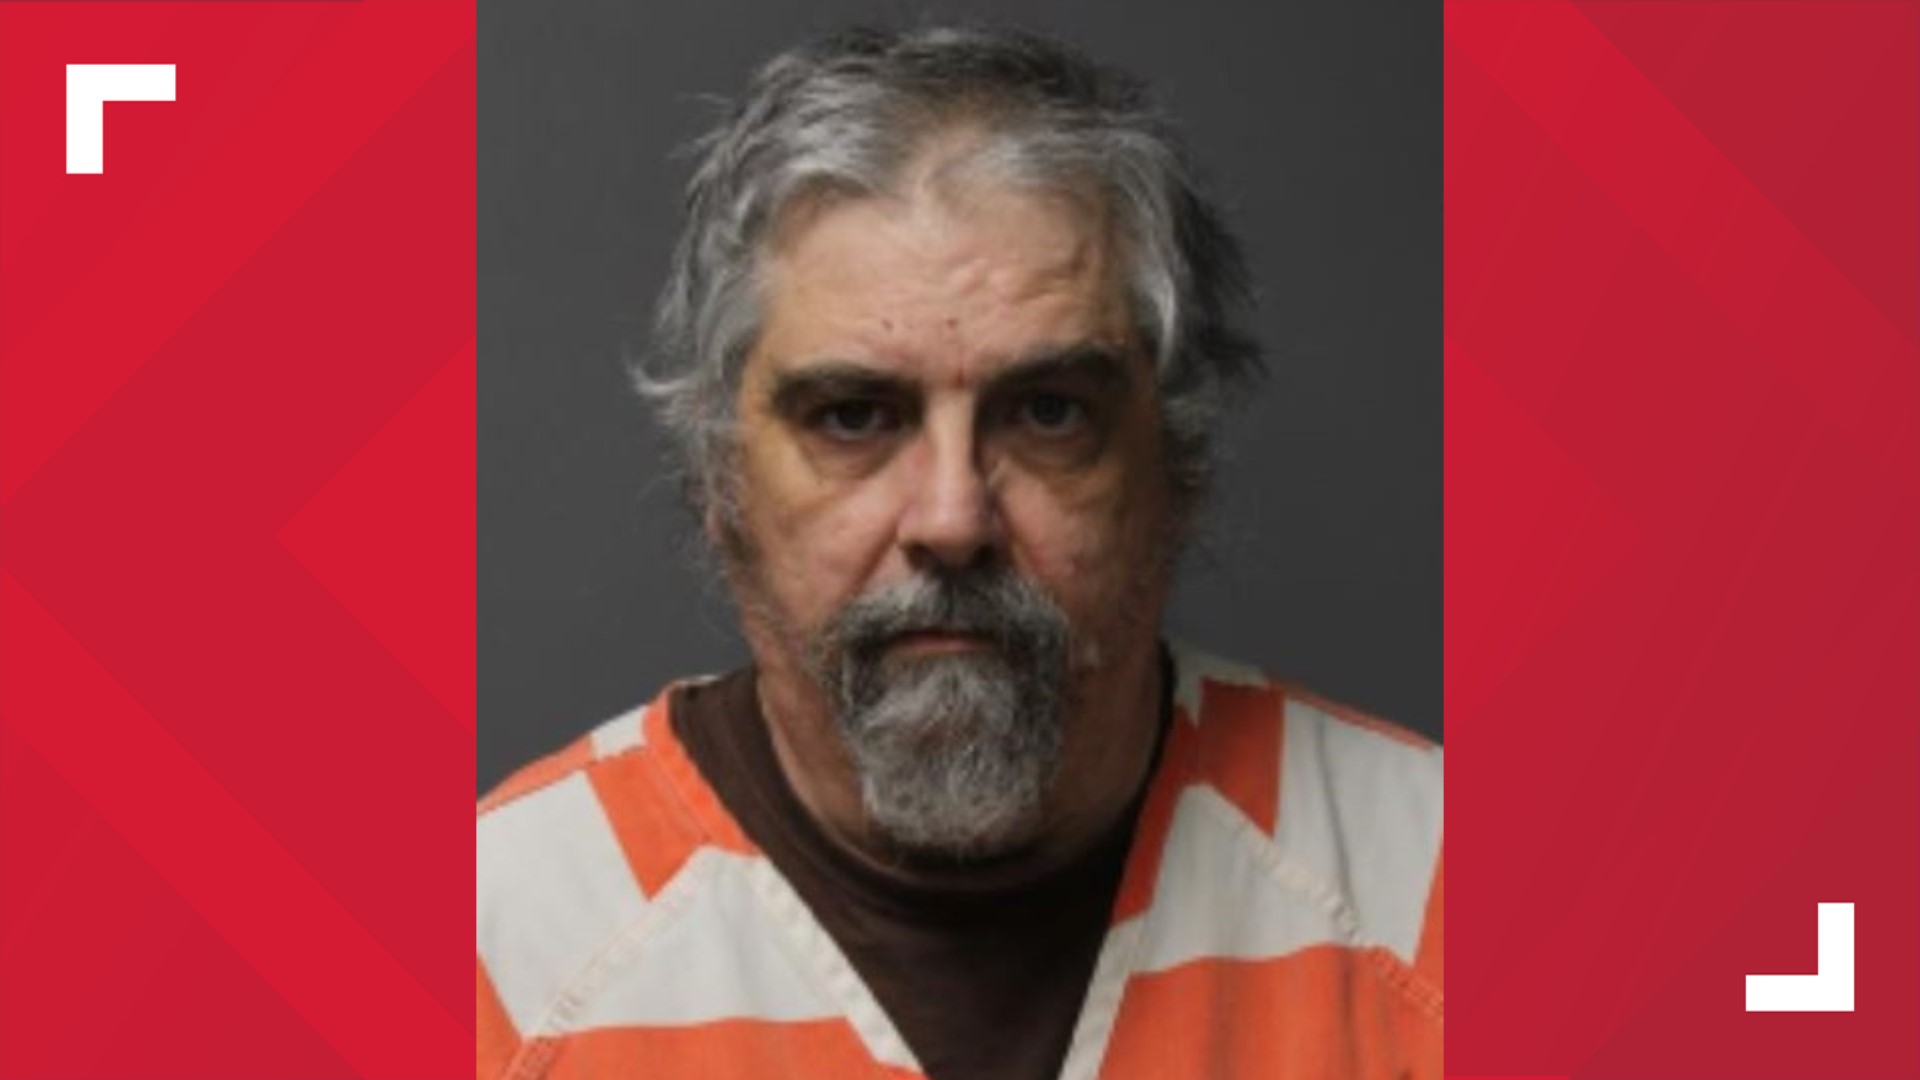 53-year-old Roy Allen Hogan of Des Moines is charged with attempted murder, burglary and willful injury.